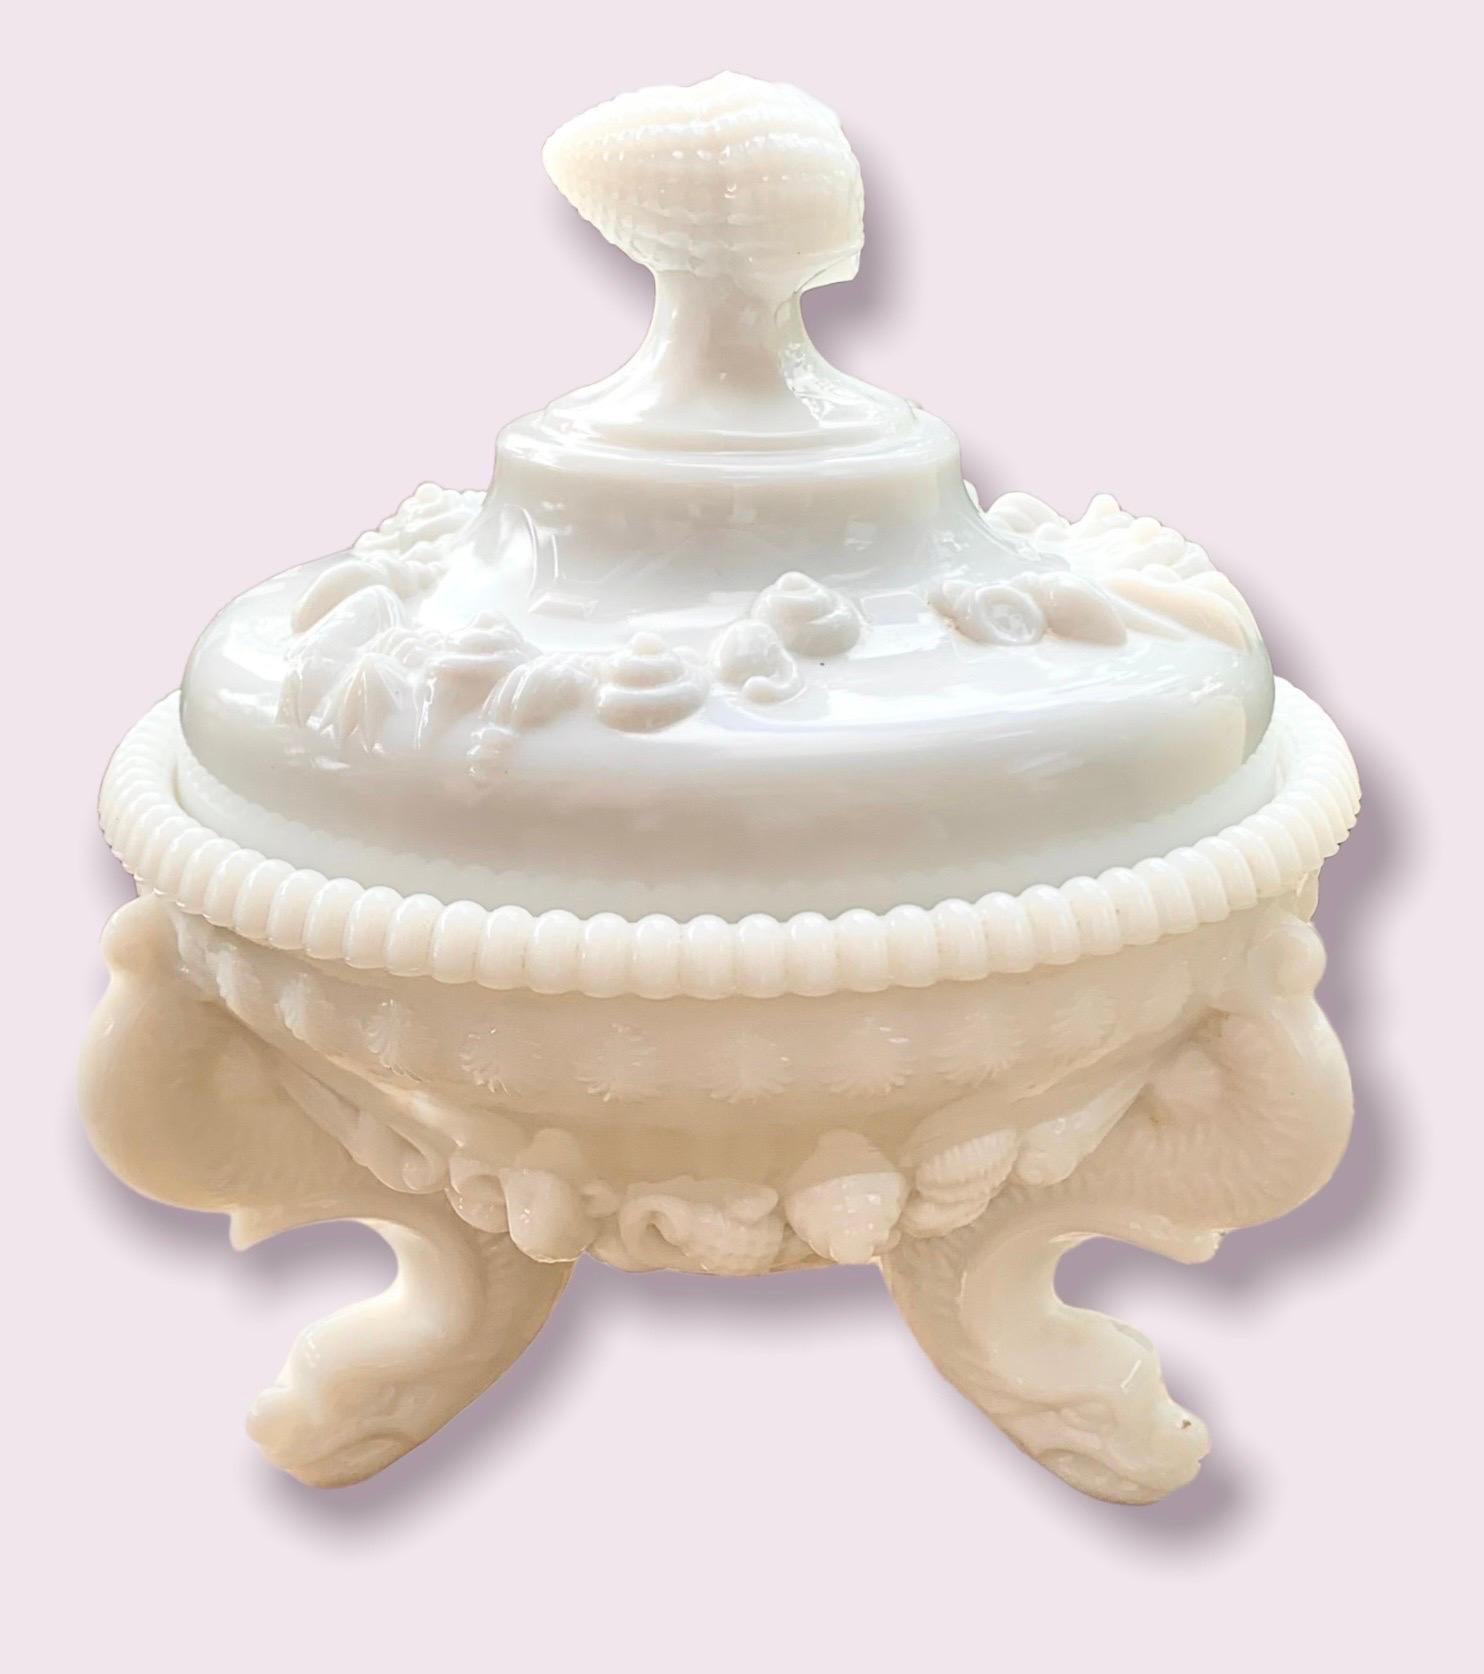 Mid-20th Century Milk Glass Candy Dish W/ Lid, Westmoreland Glass Co. Argonaut Shell Pattern For Sale